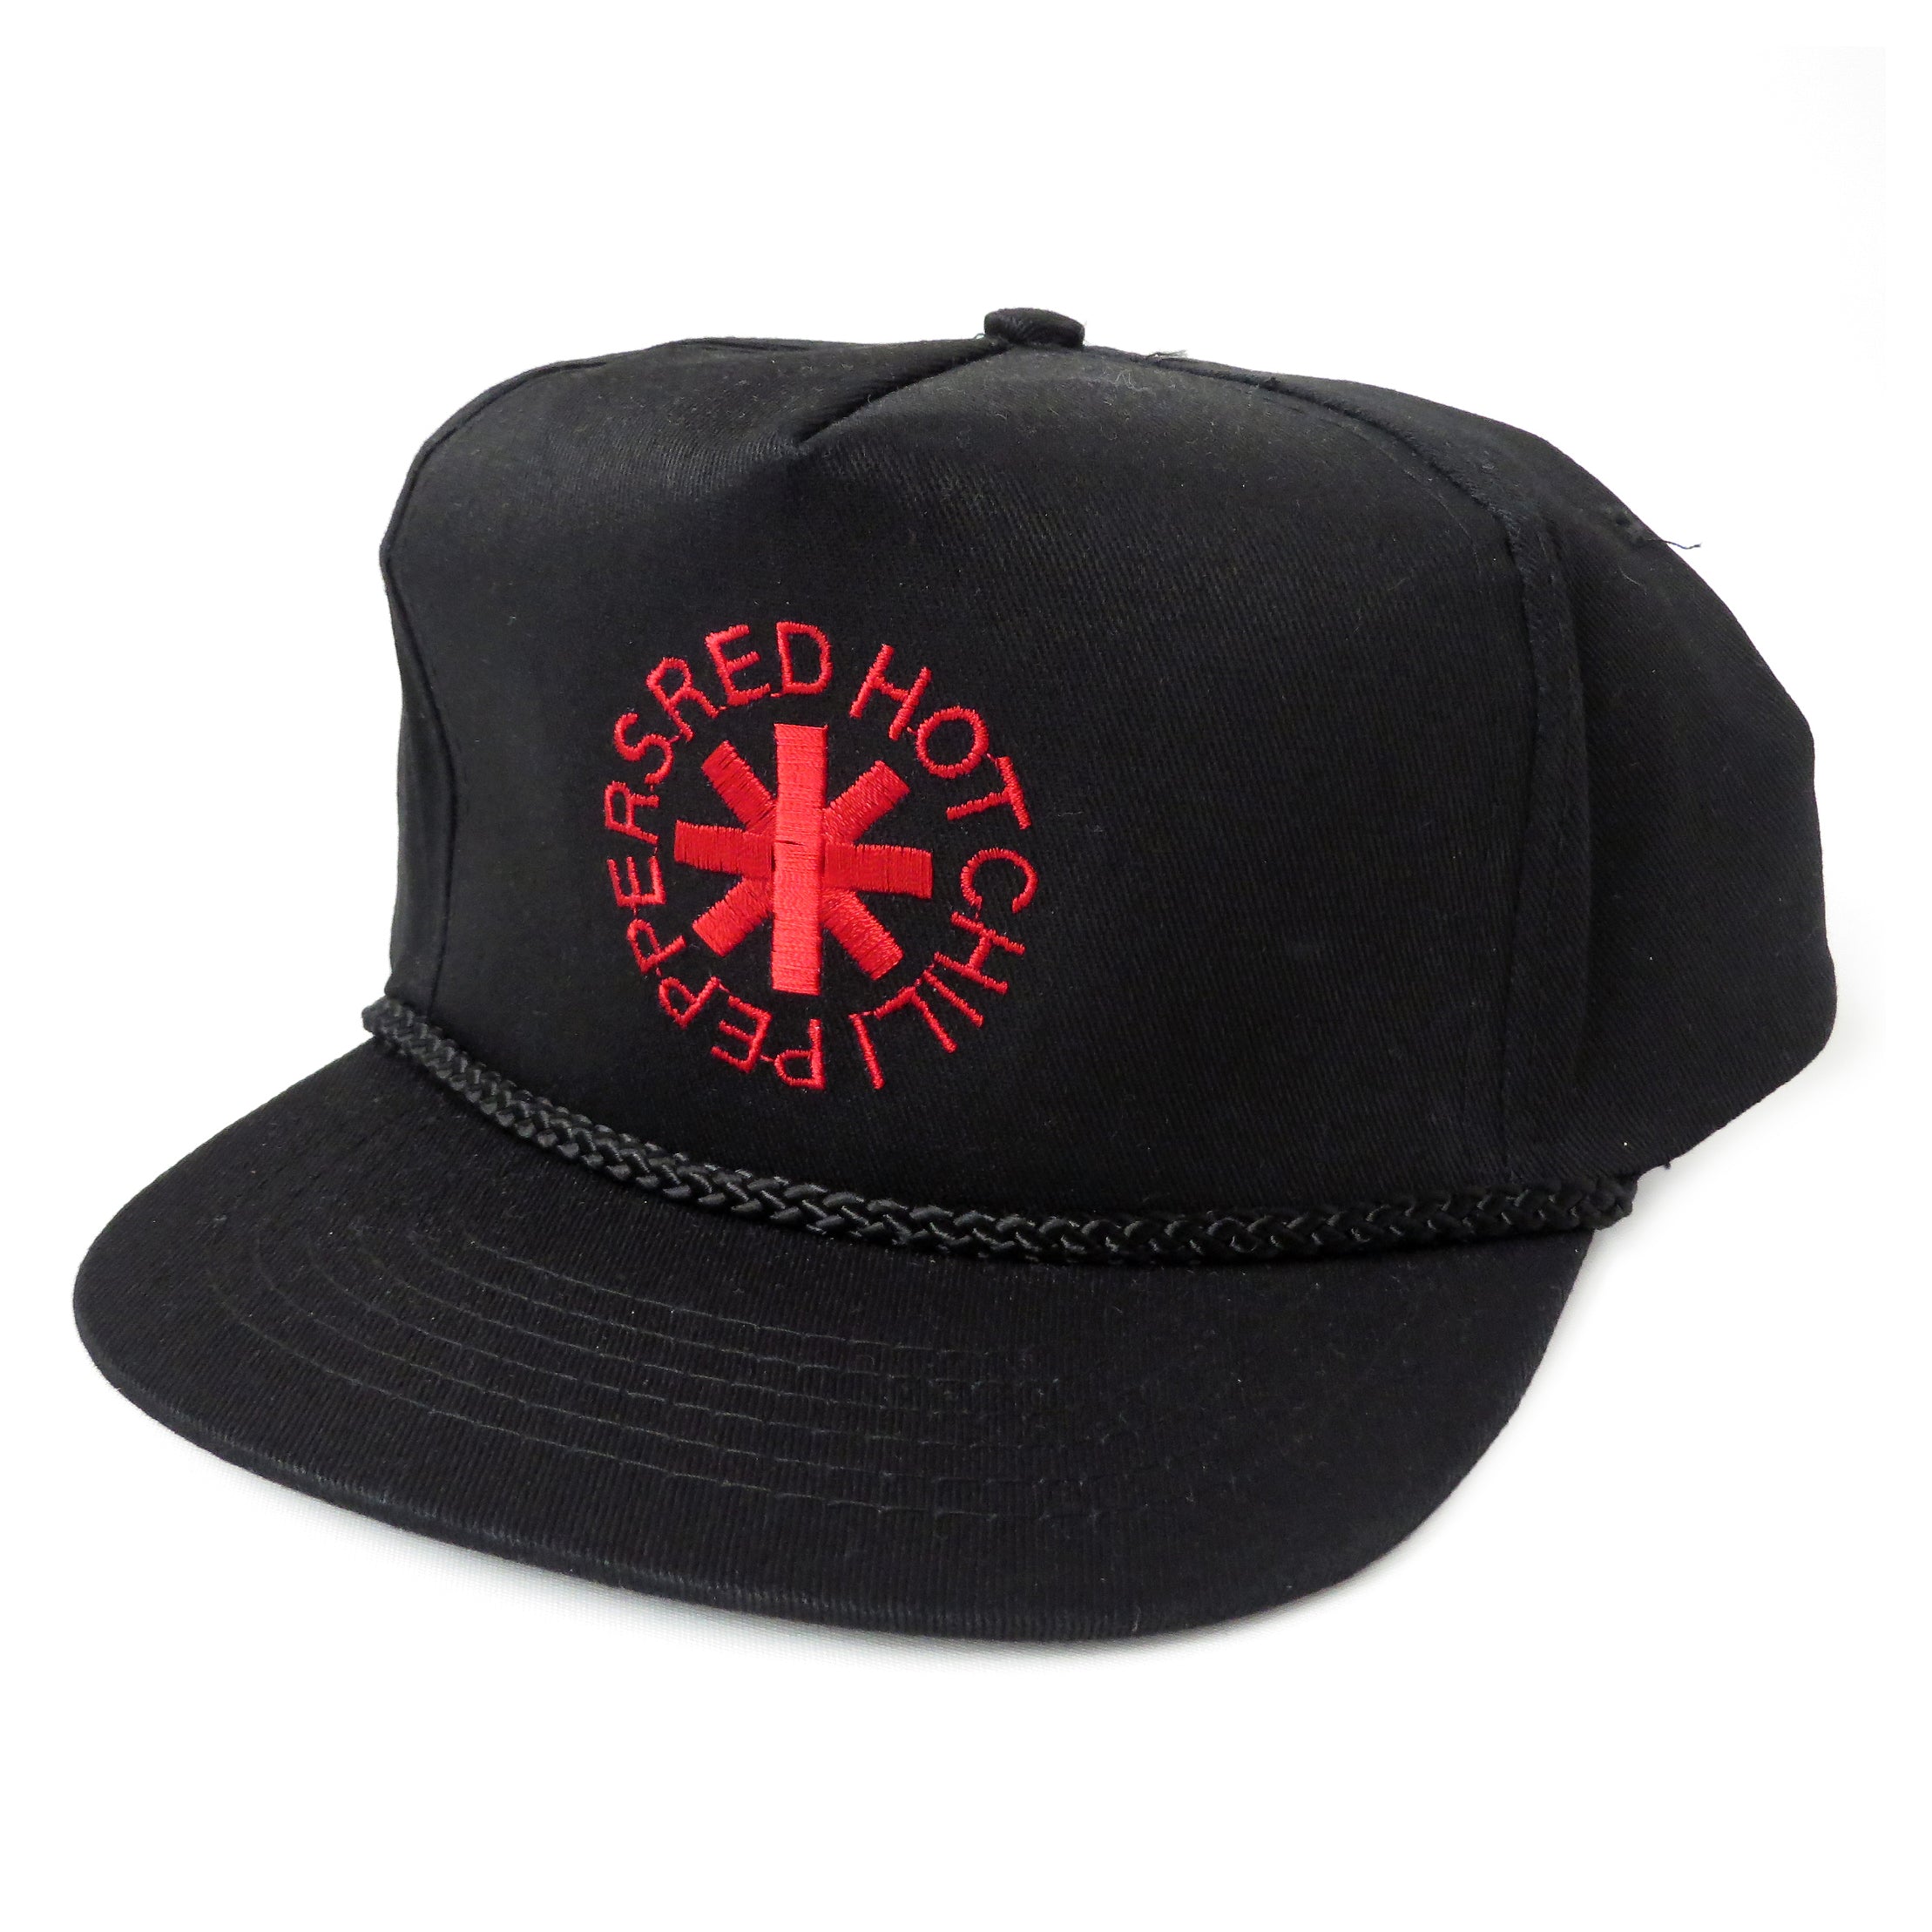 Vintage Red Hot Chili Peppers Snapback Hat